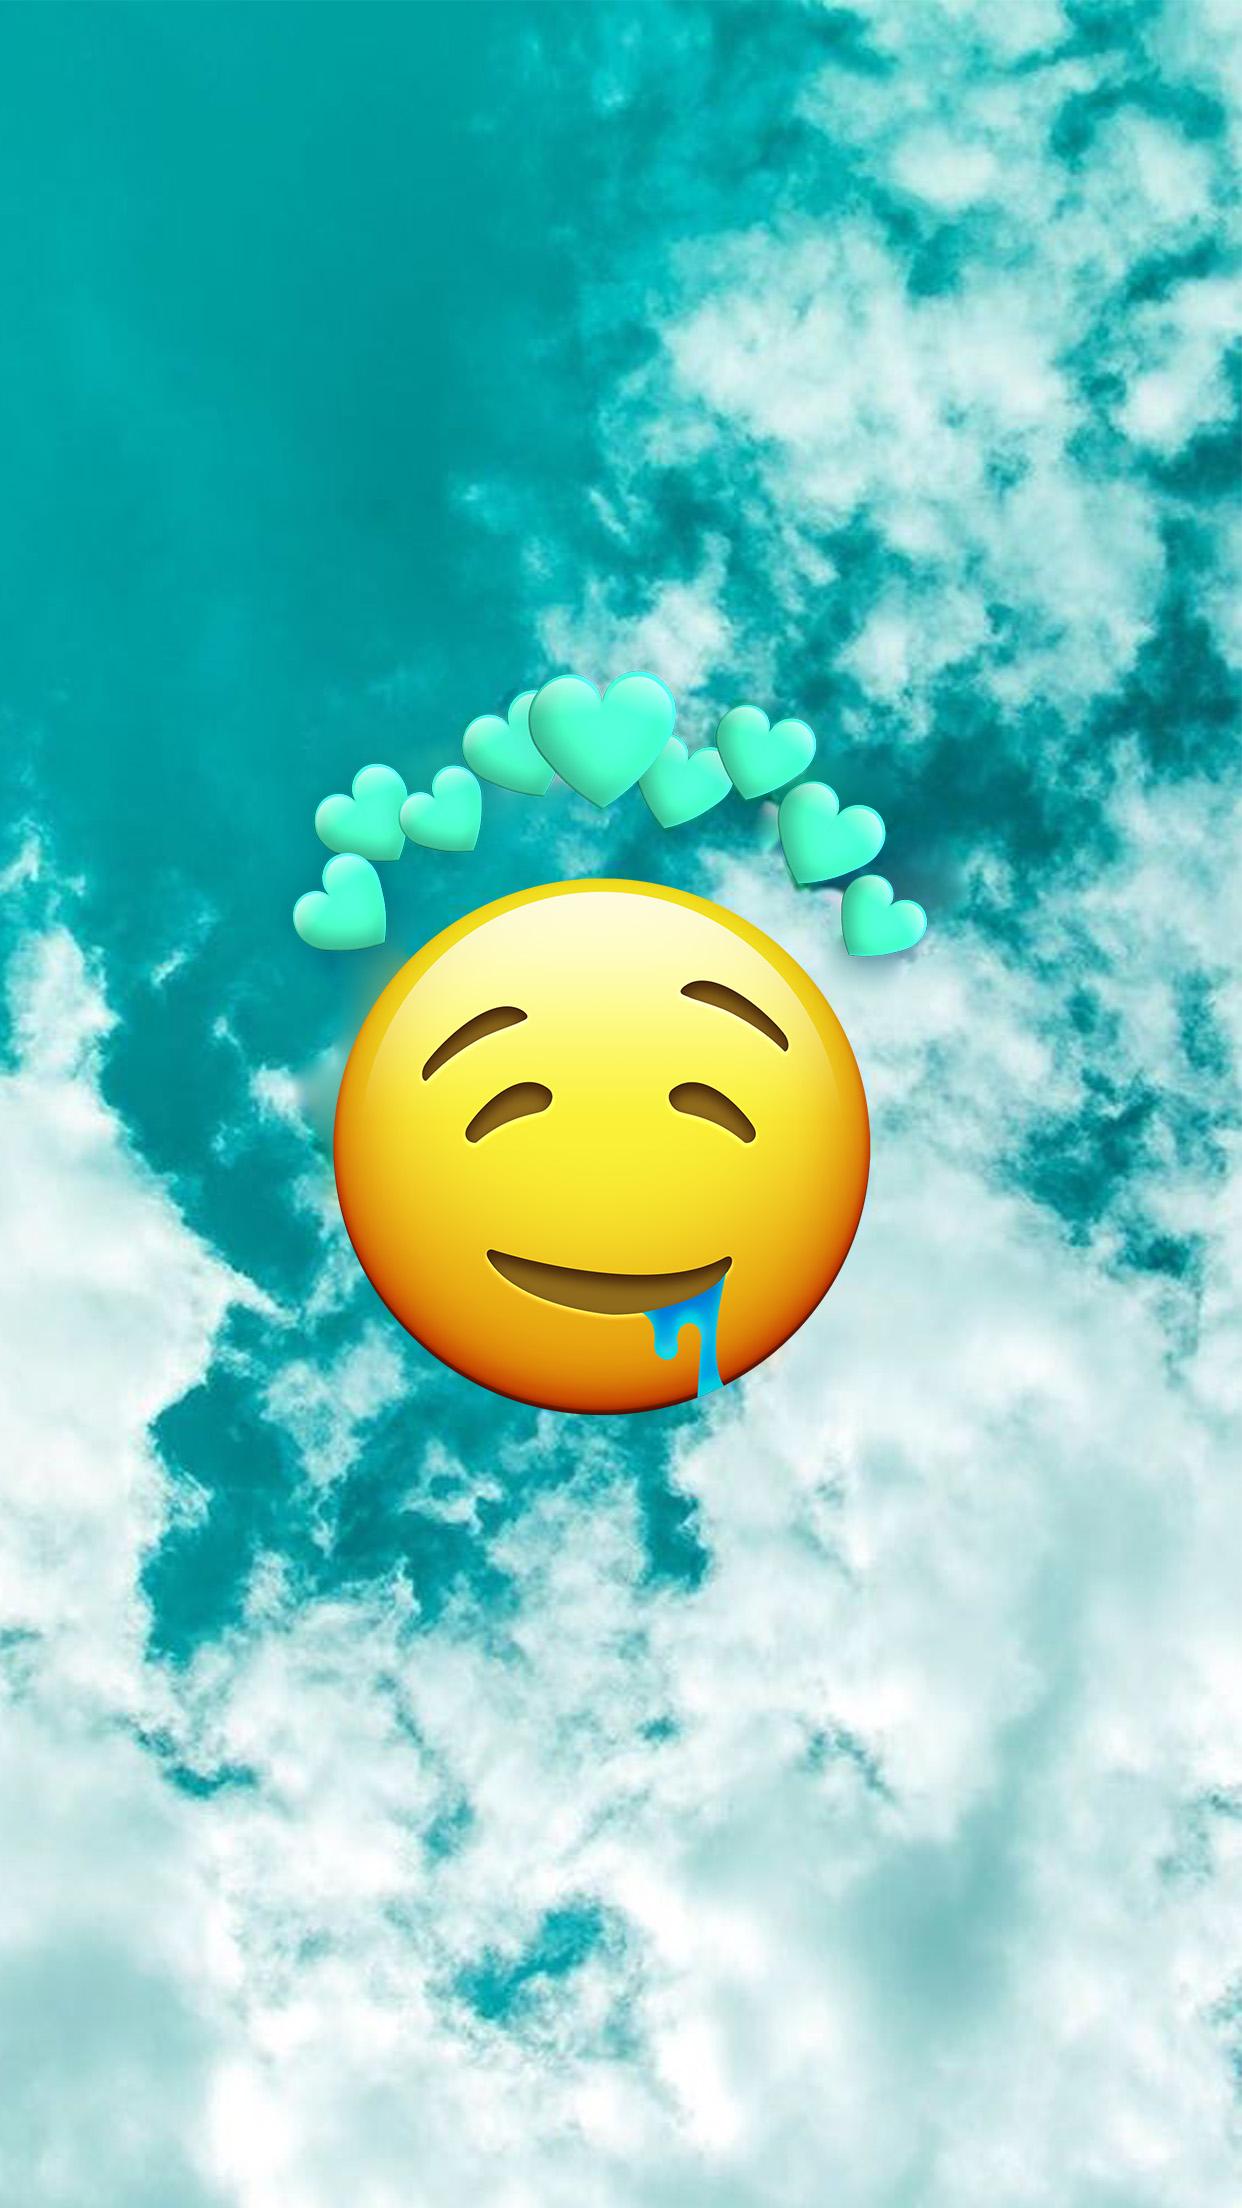 emoji wallpaper APK 20.1 for Android